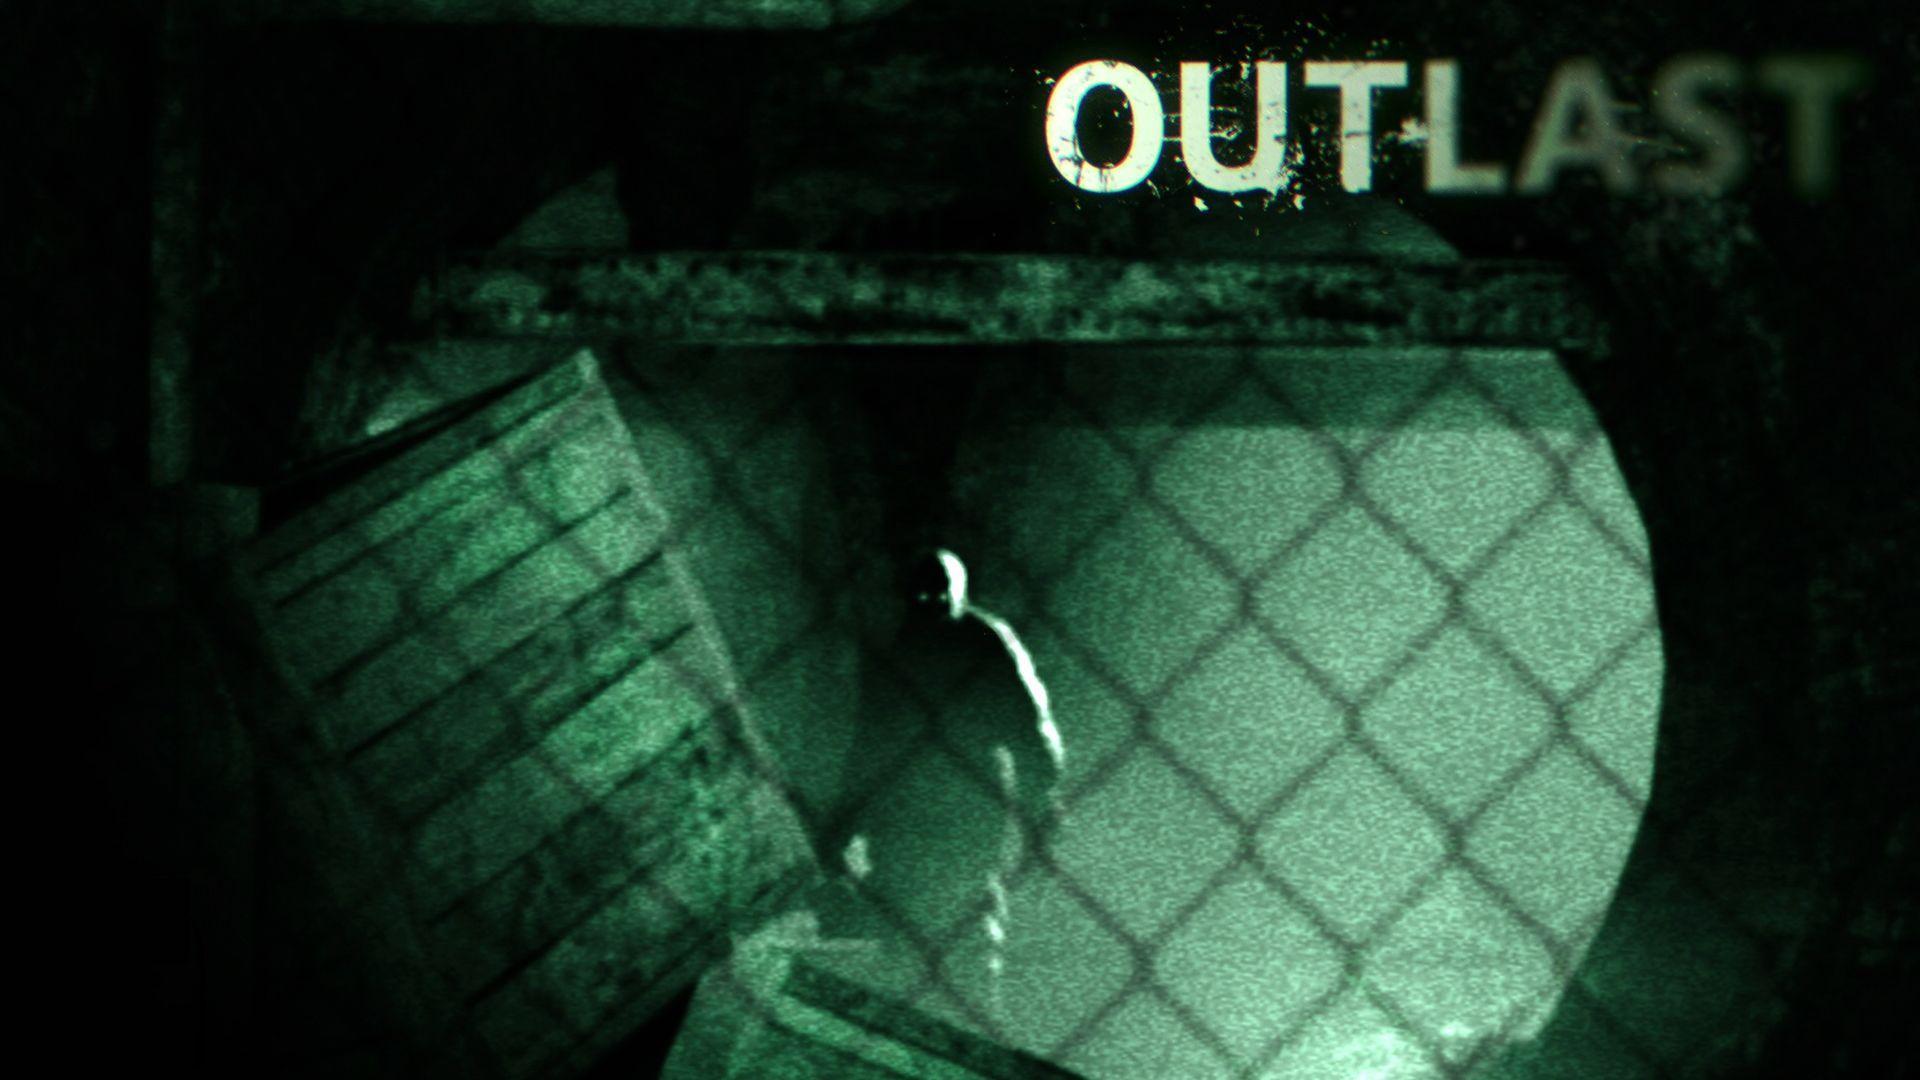 image about Outlast. Plays, PlayStation